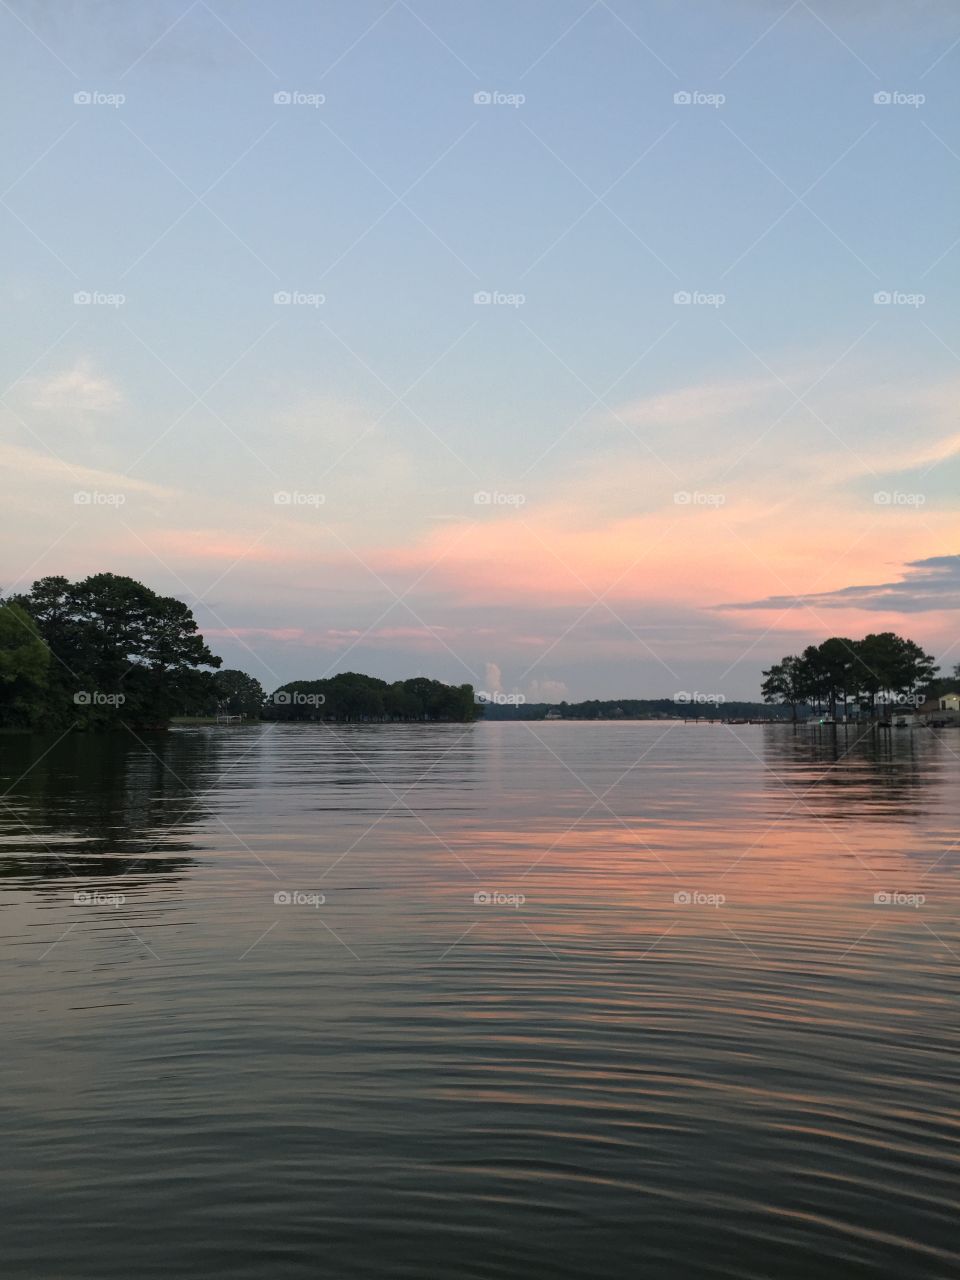 This soft Southern sunset is reflected in the ripple-filled lake water, reminding us of how each choice made ripples further than we can see....